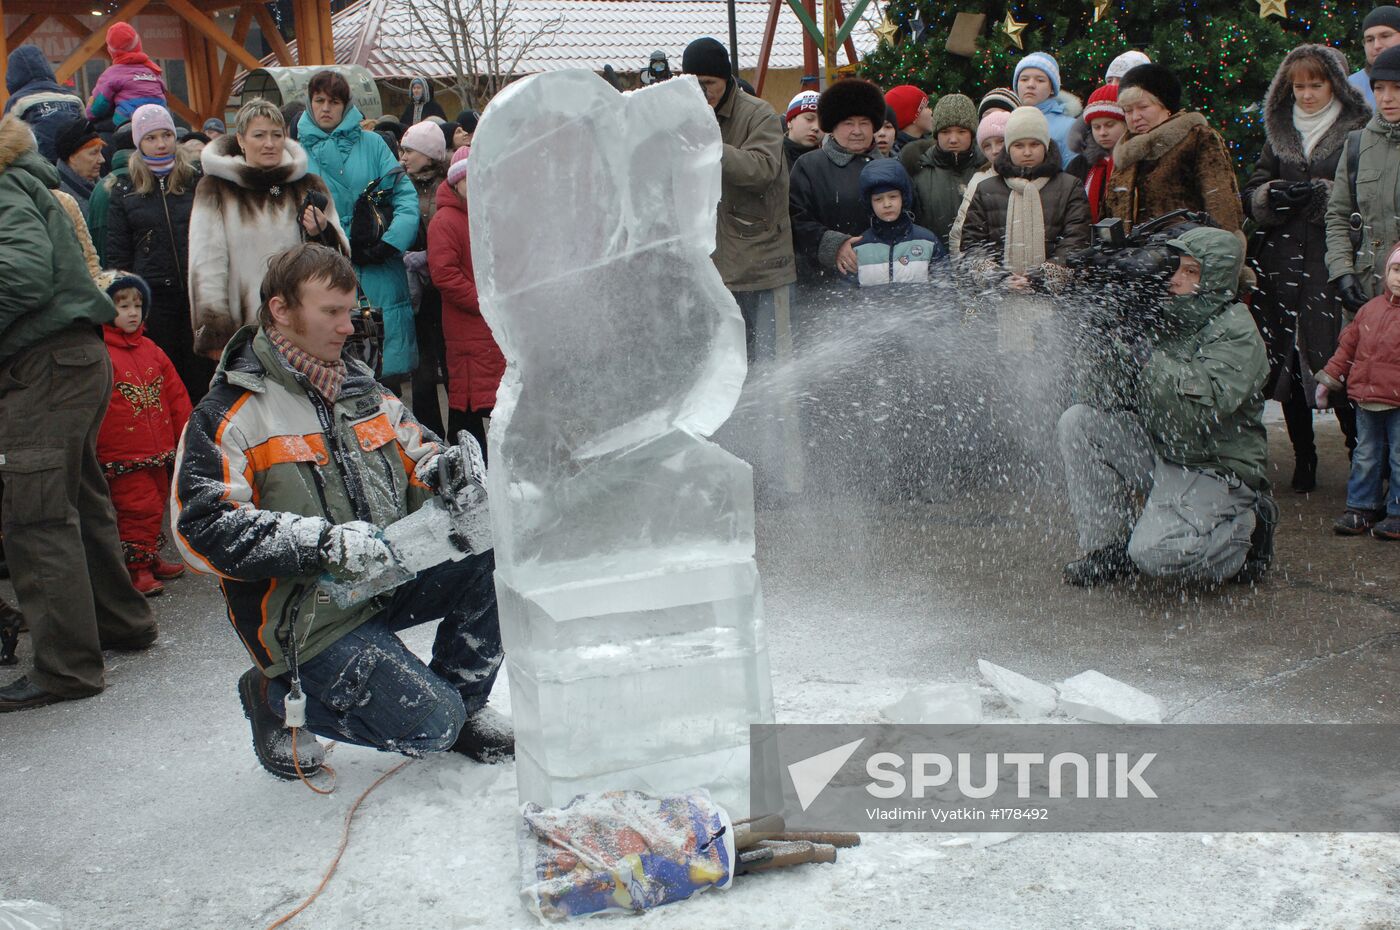 Master class in ice carving